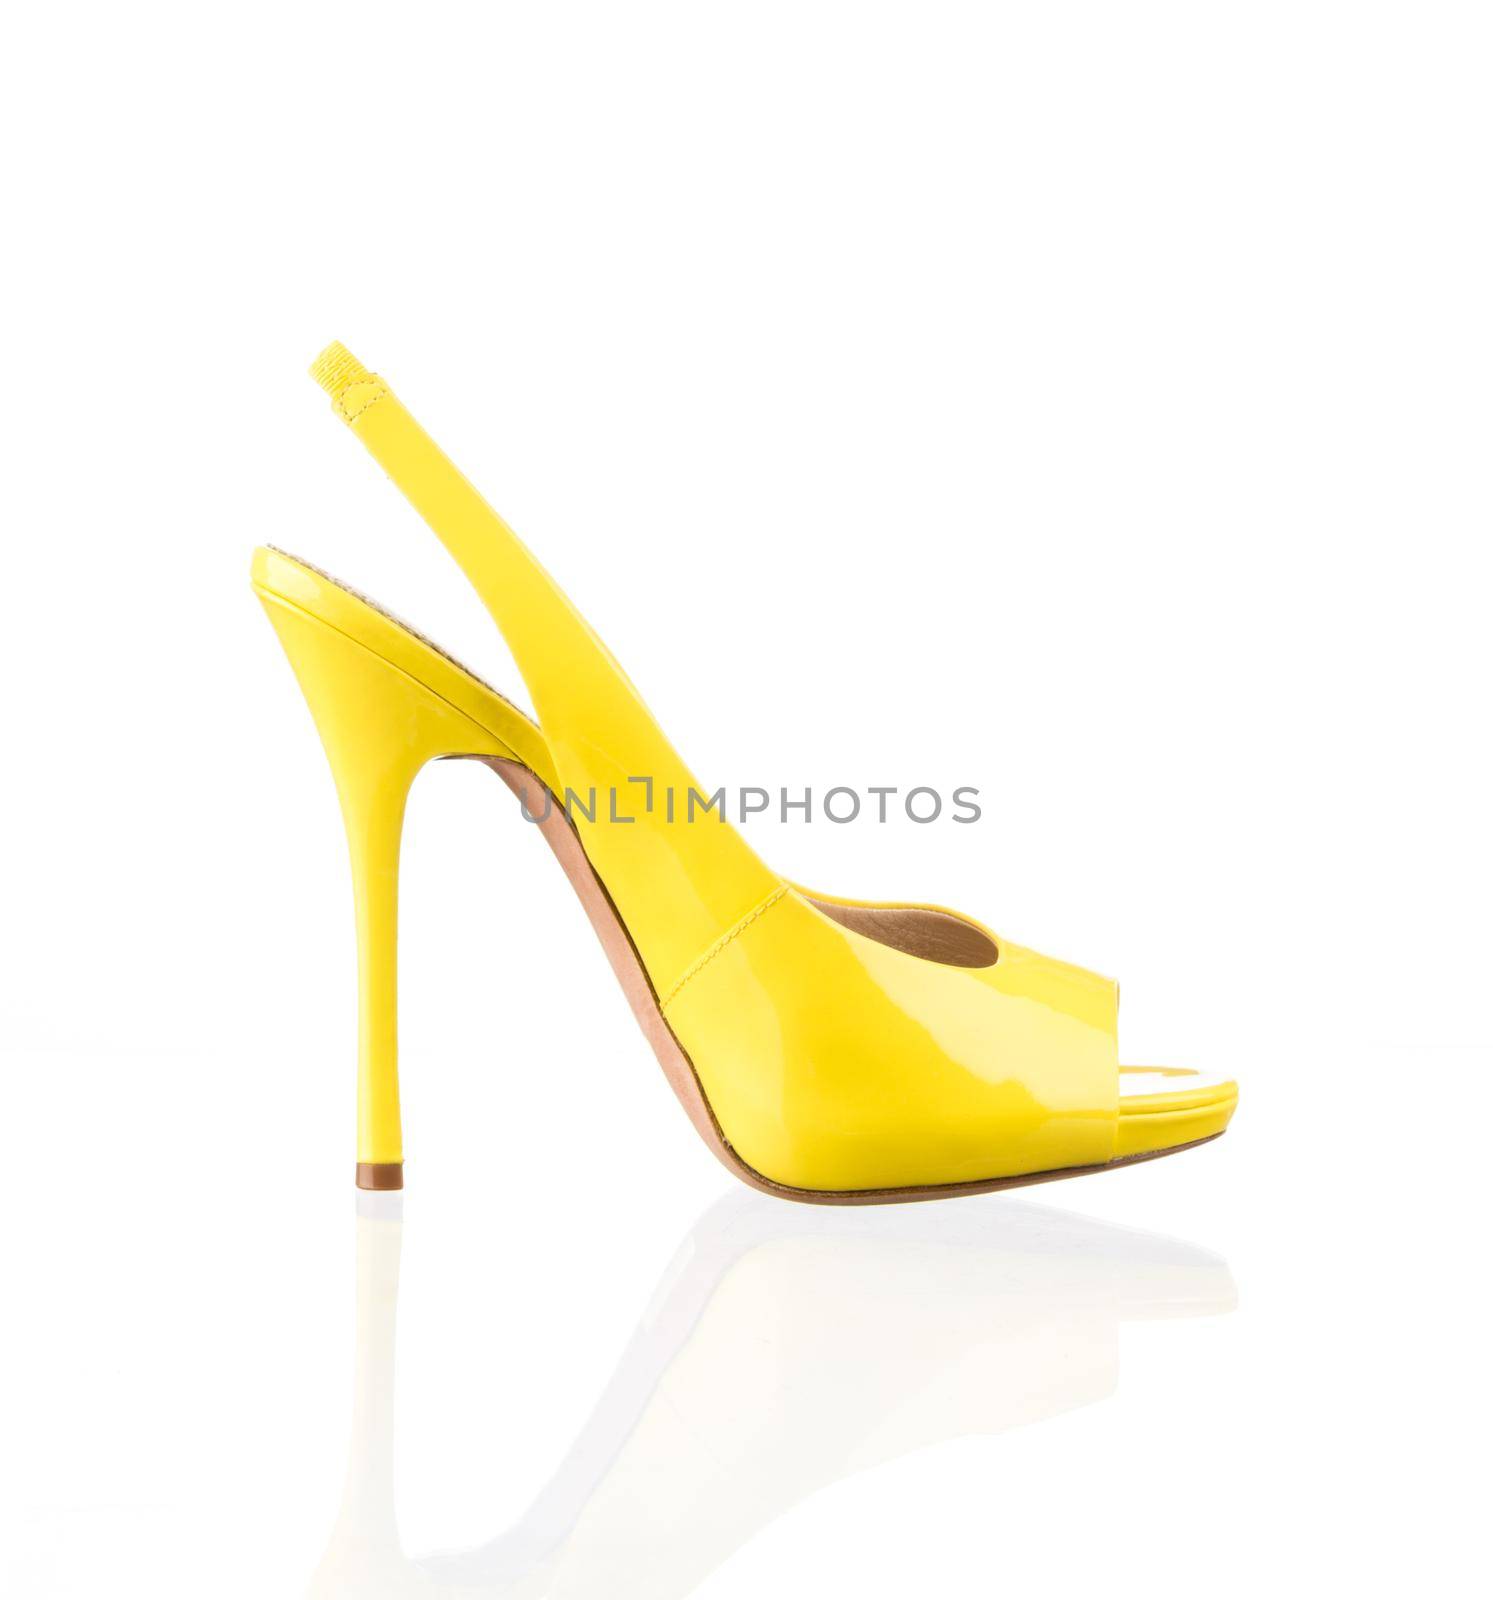 Woman fashion summer shoe with reflection